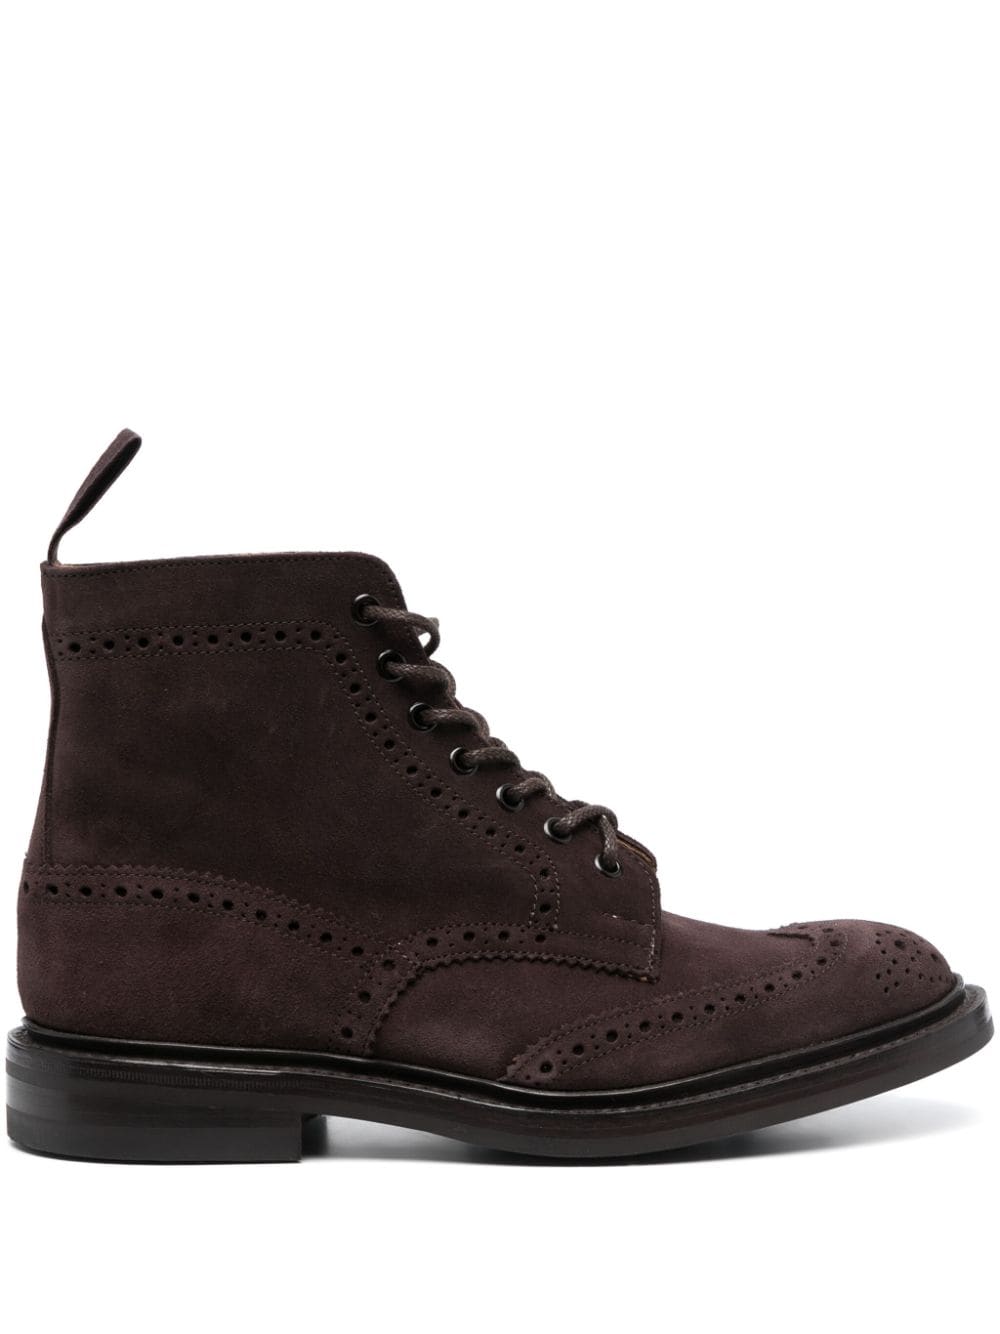 Shop Tricker's Stow Dainite Sole In Coffee Ox Reserved